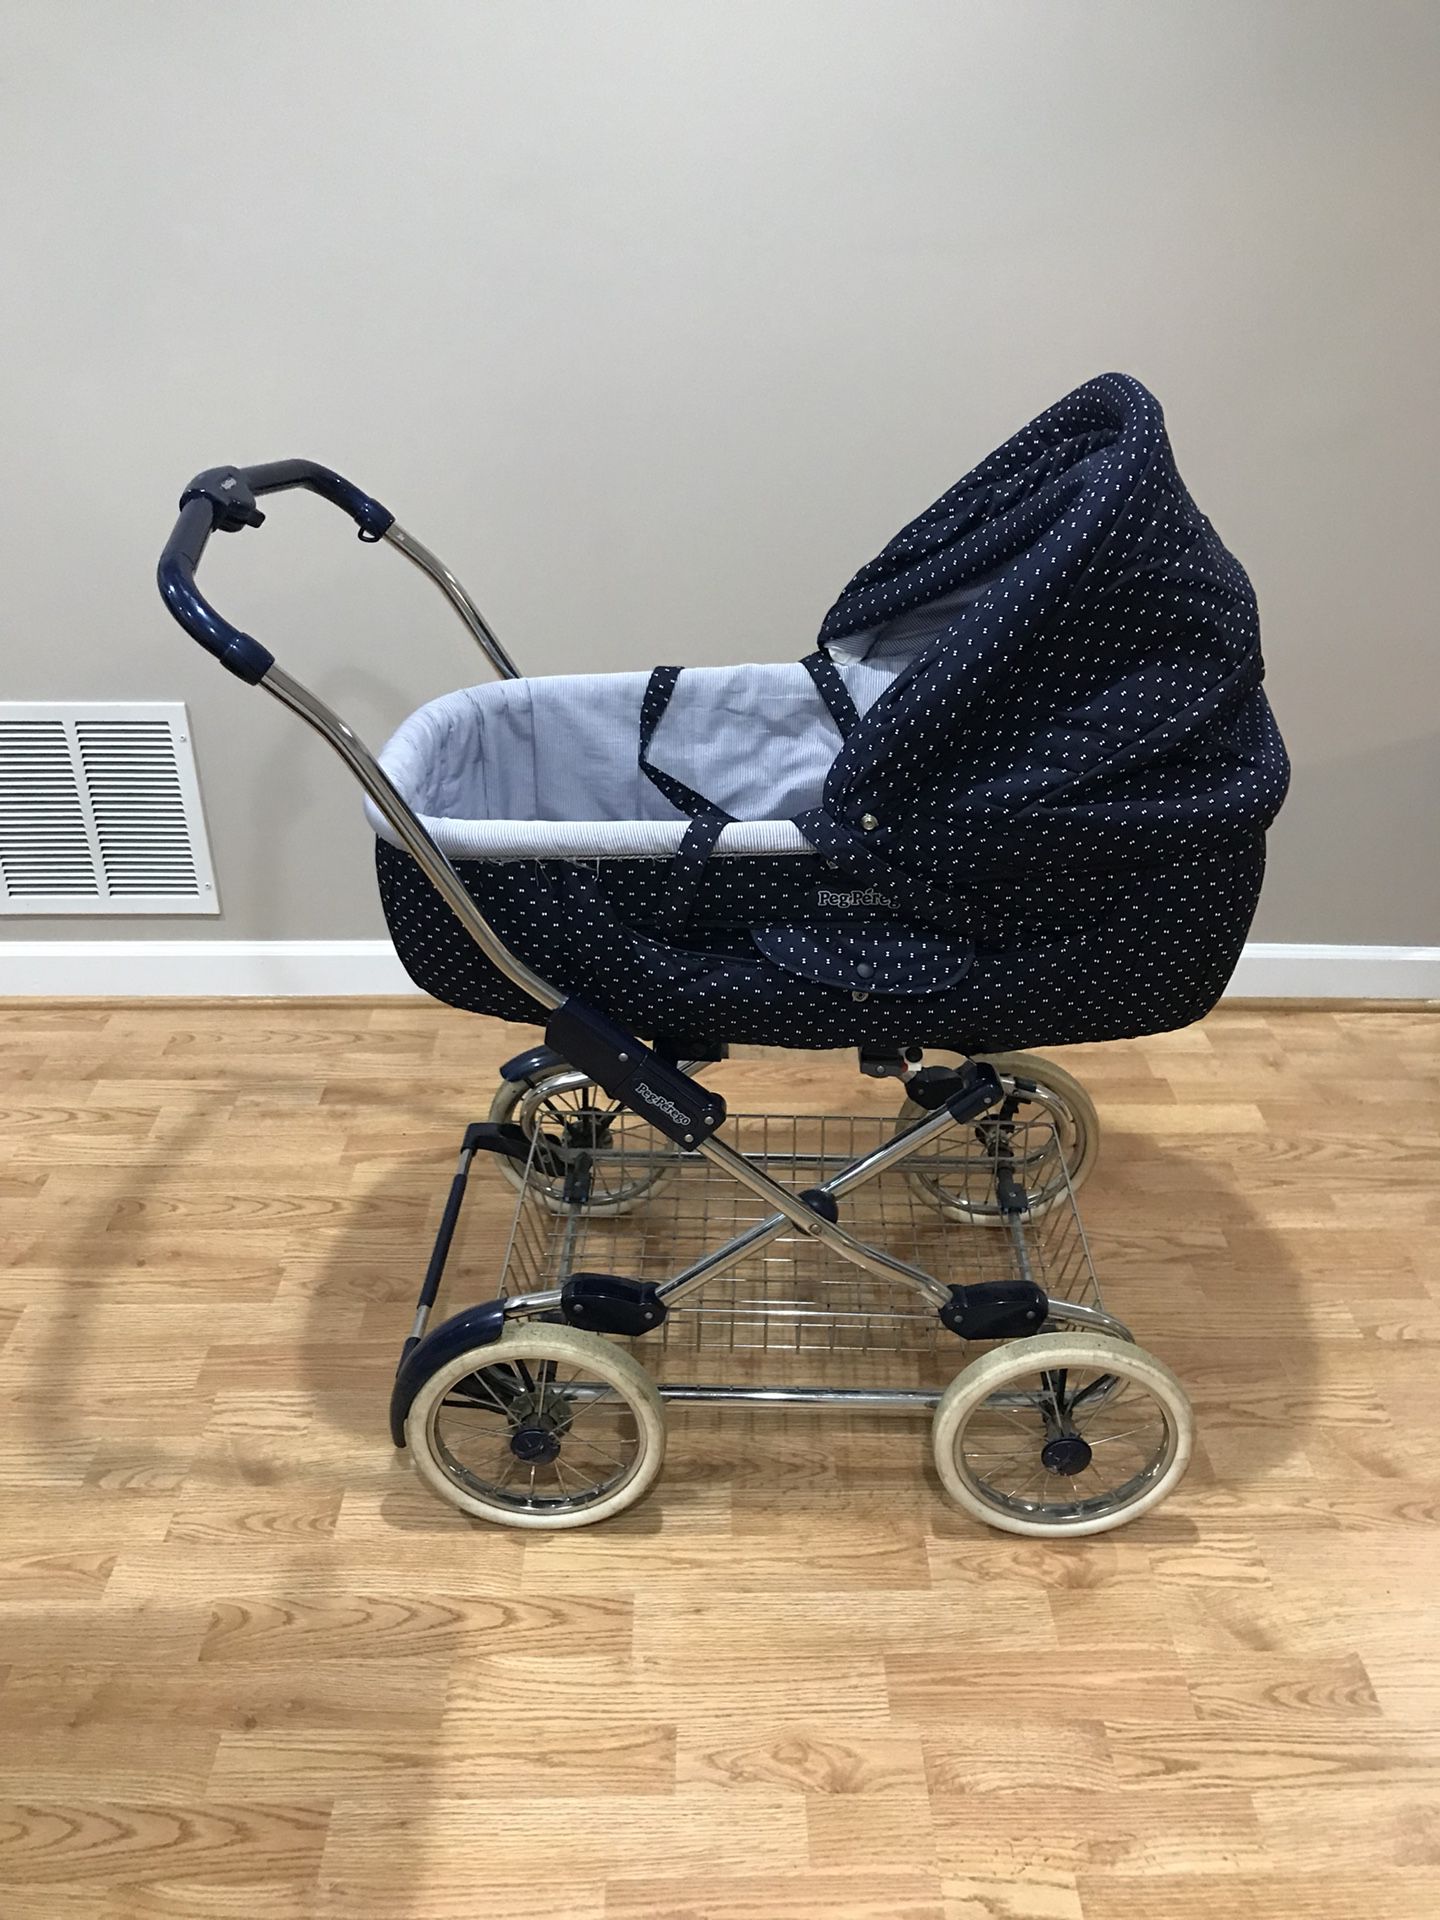 PegPerego baby carriage/bassinet, used, in good condition